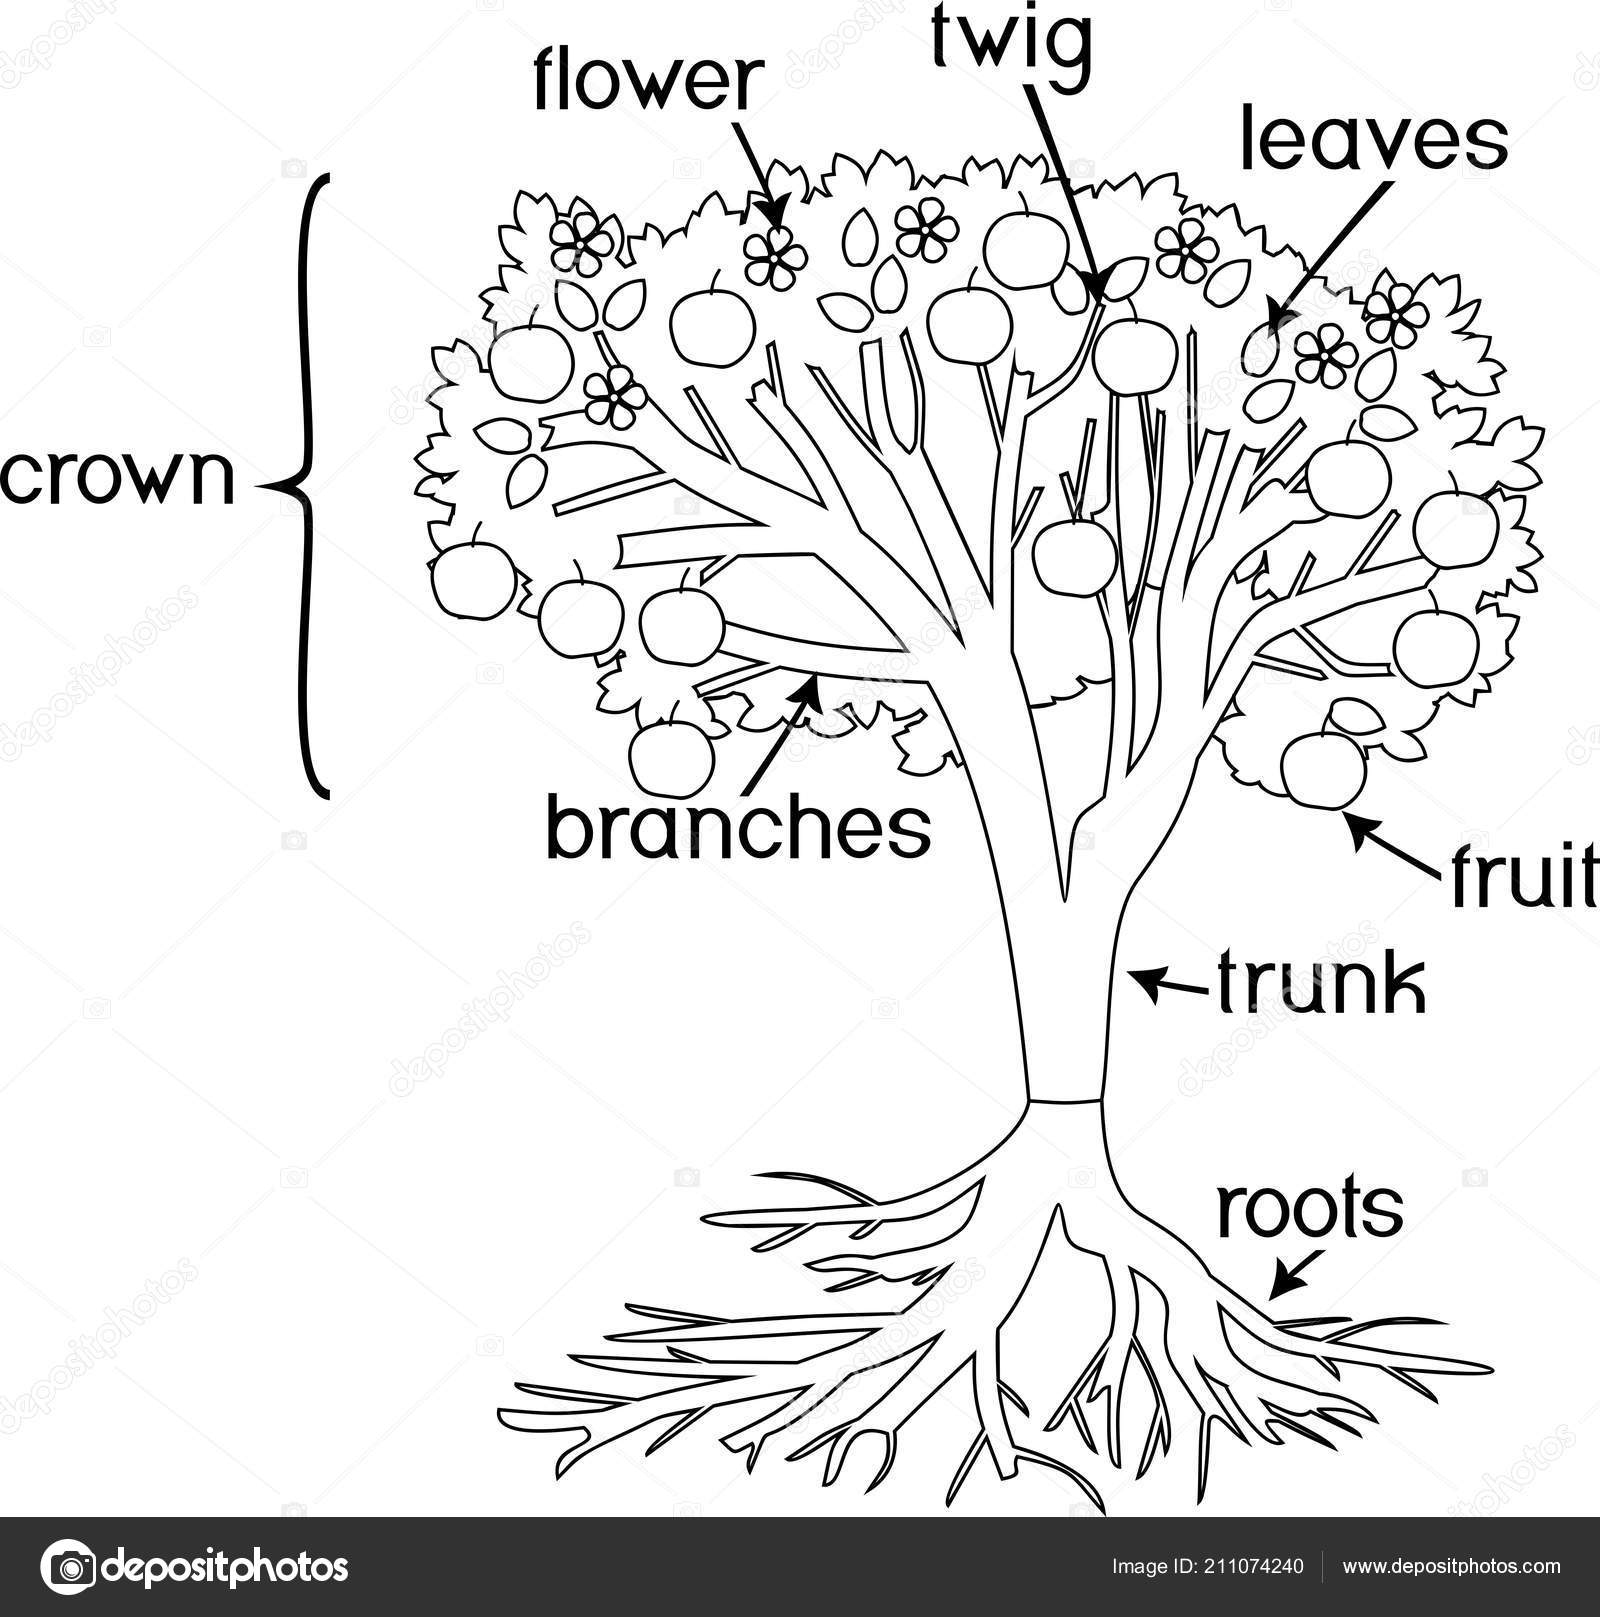 Coloring page parts plant morphology tree crown root system fruits stock vector by mariaflaya